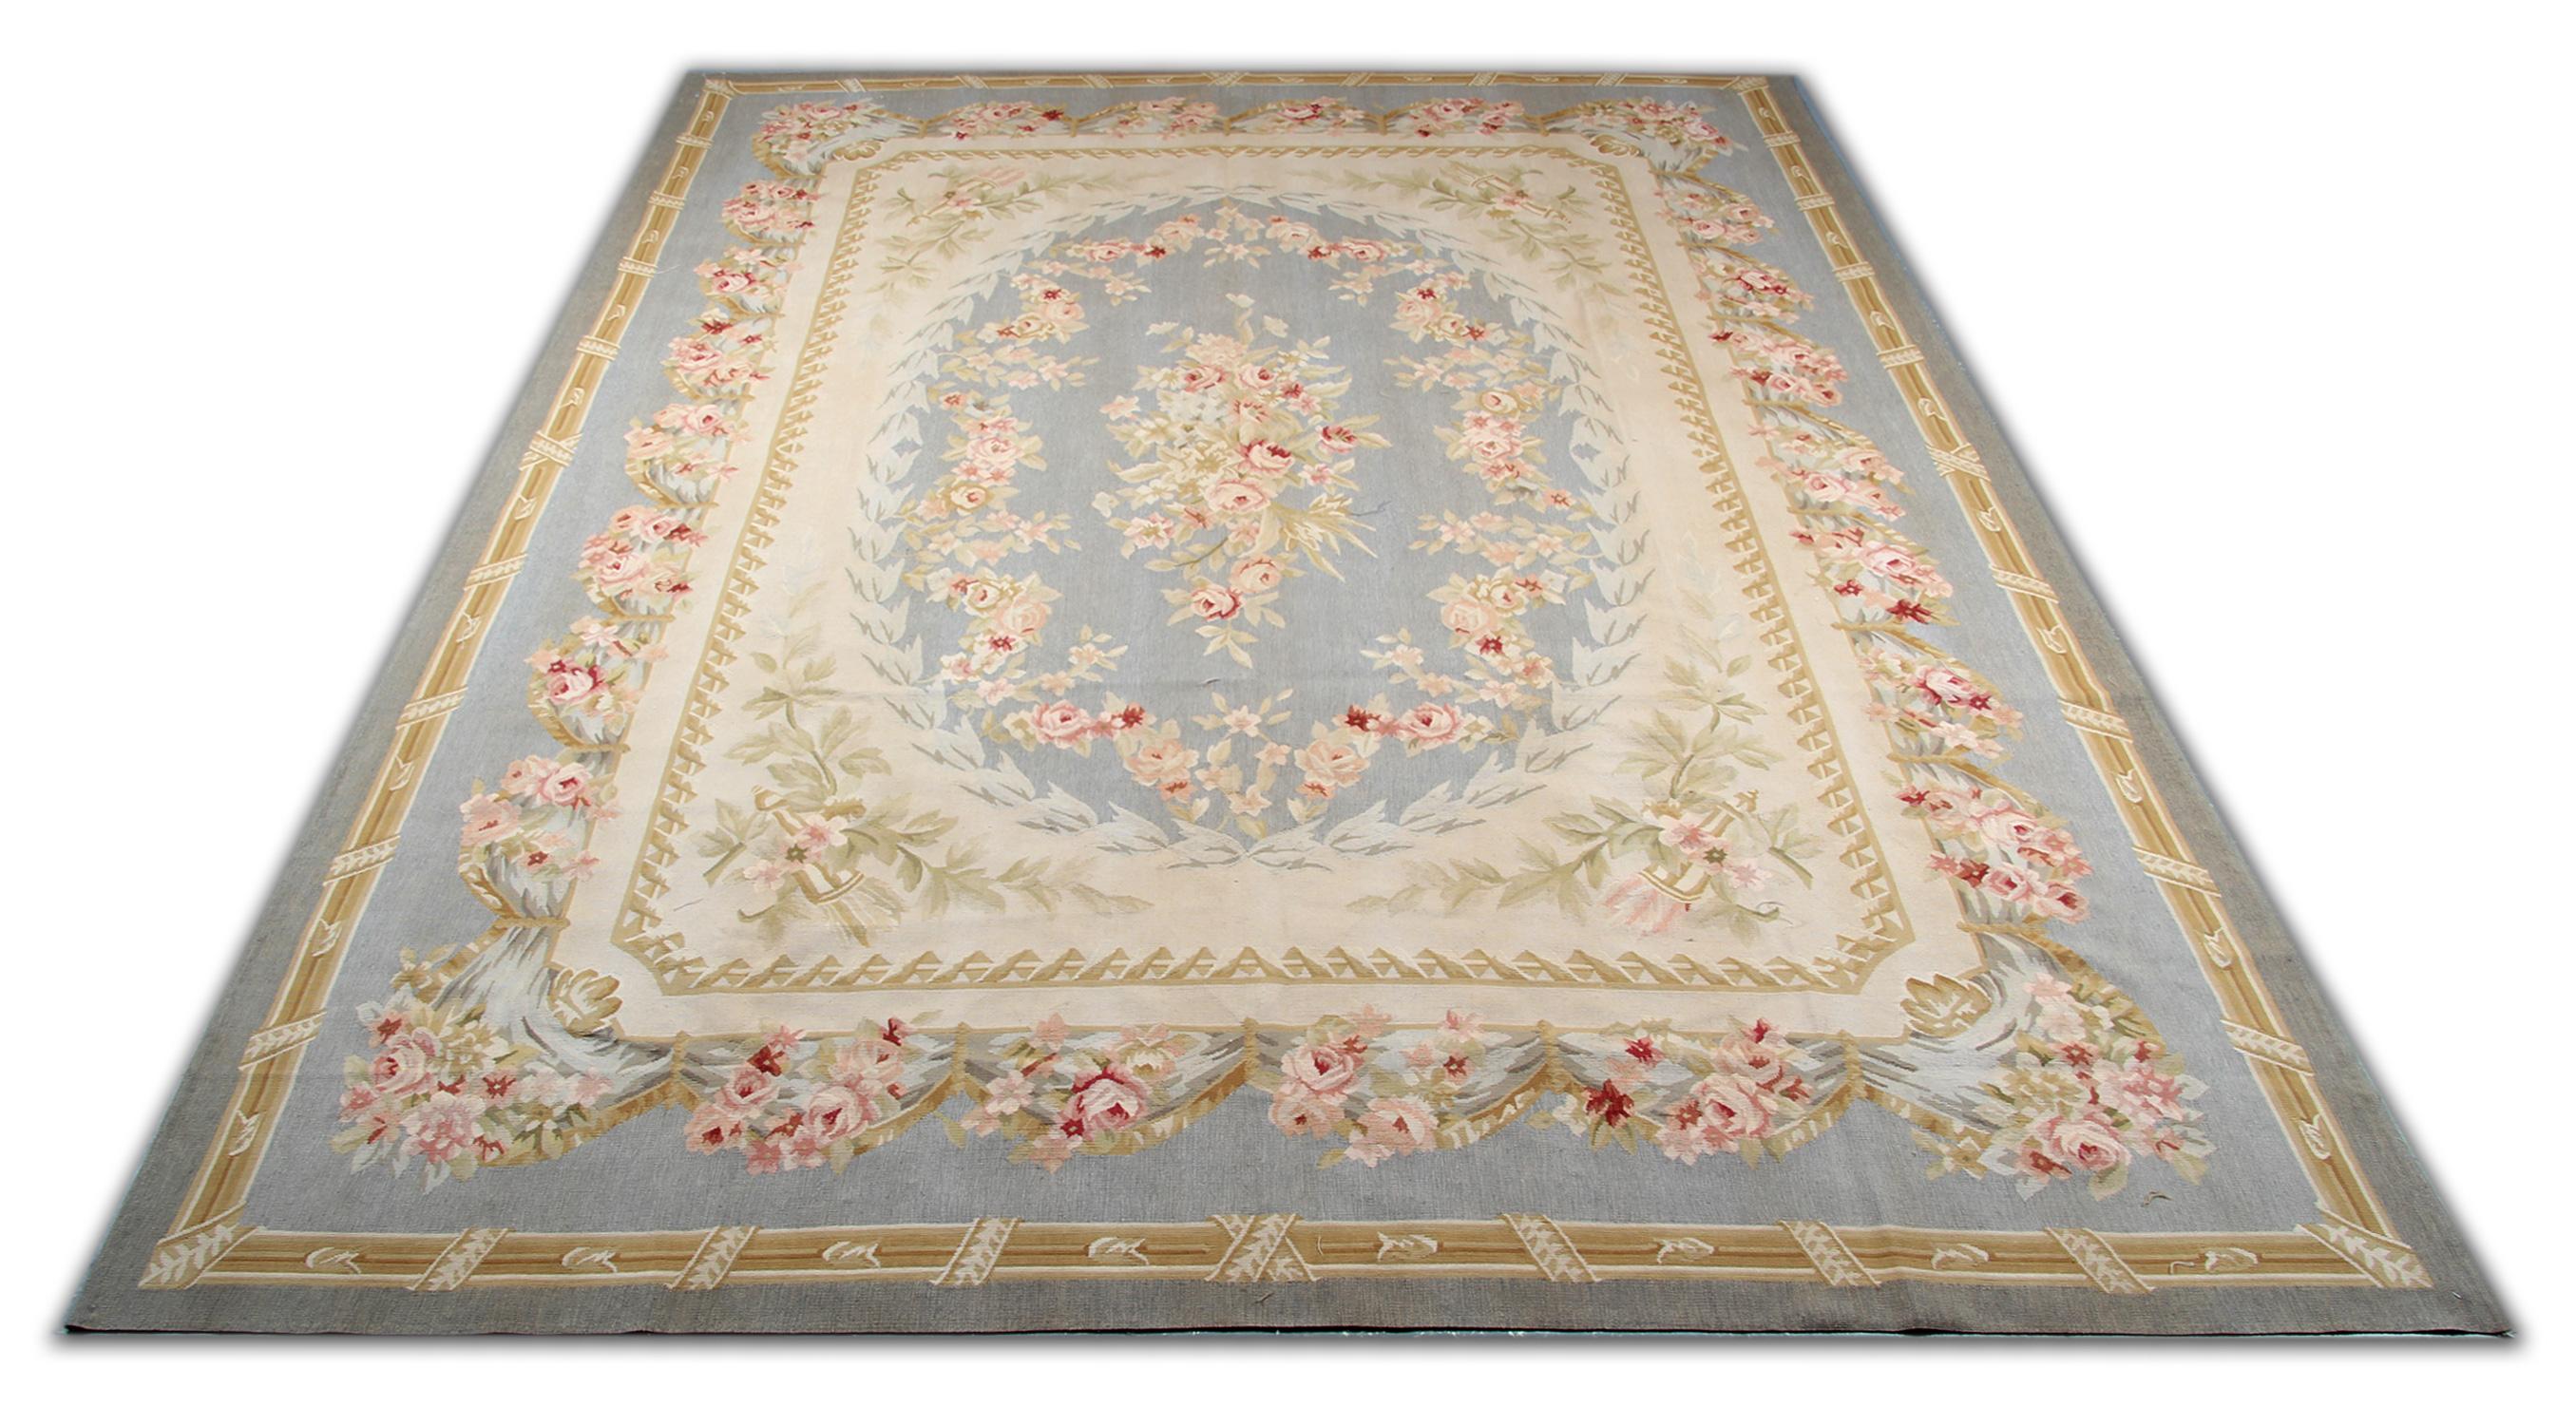 This handmade carpet blue rug is a high-quality piece perfect for use as a living room rugs. This decorative needlepoint gets most of the attention in our rug store by clients because of the colour and design.
These handmade elegant Chinese